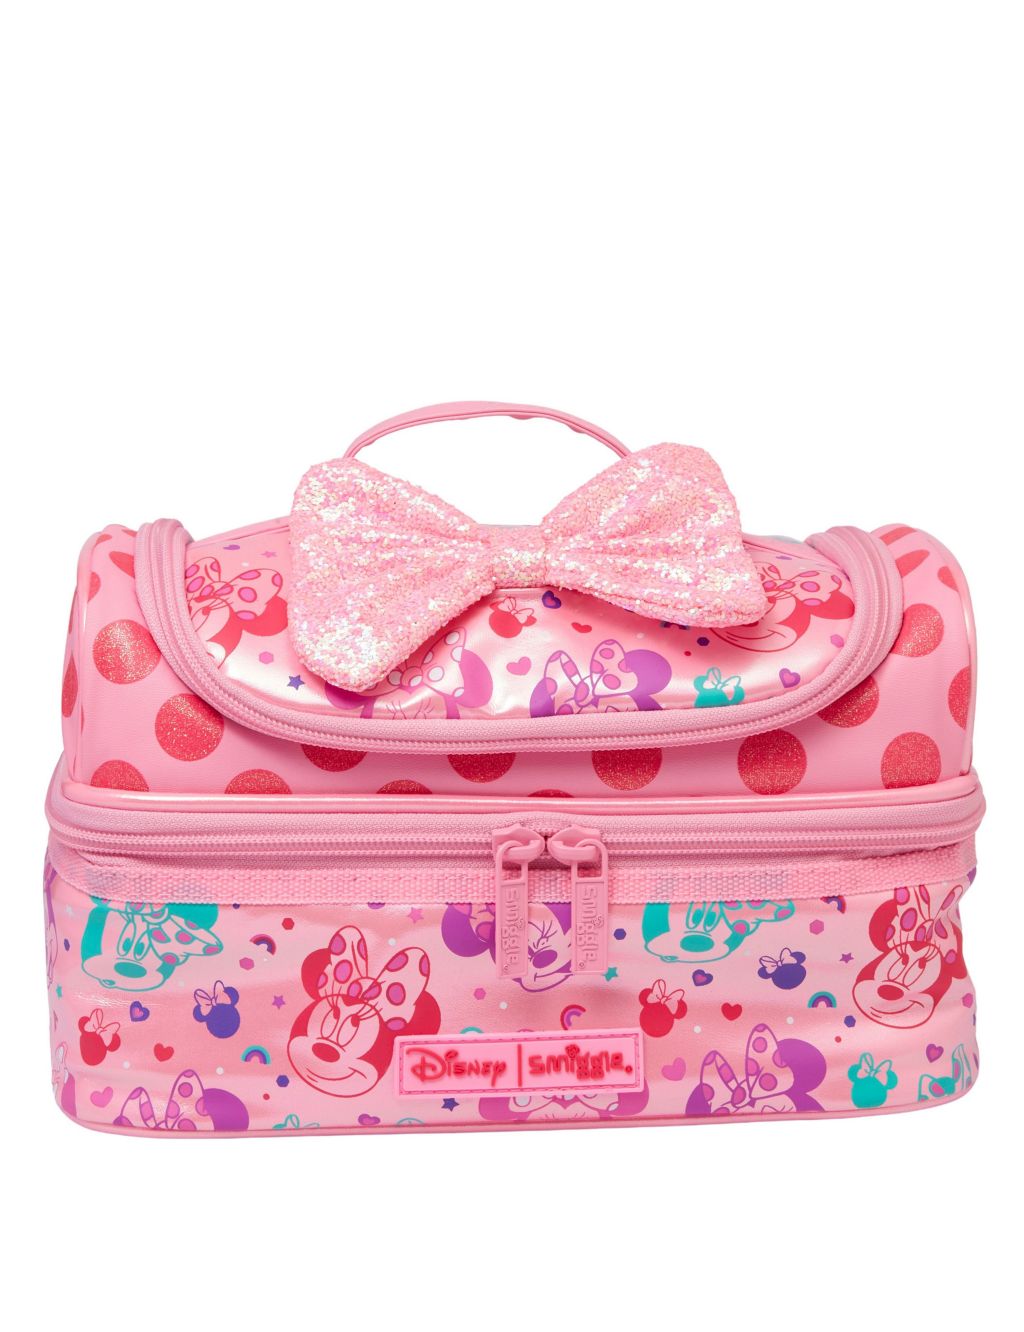 Kids' Minnie Mouse™ Lunch Box image 1